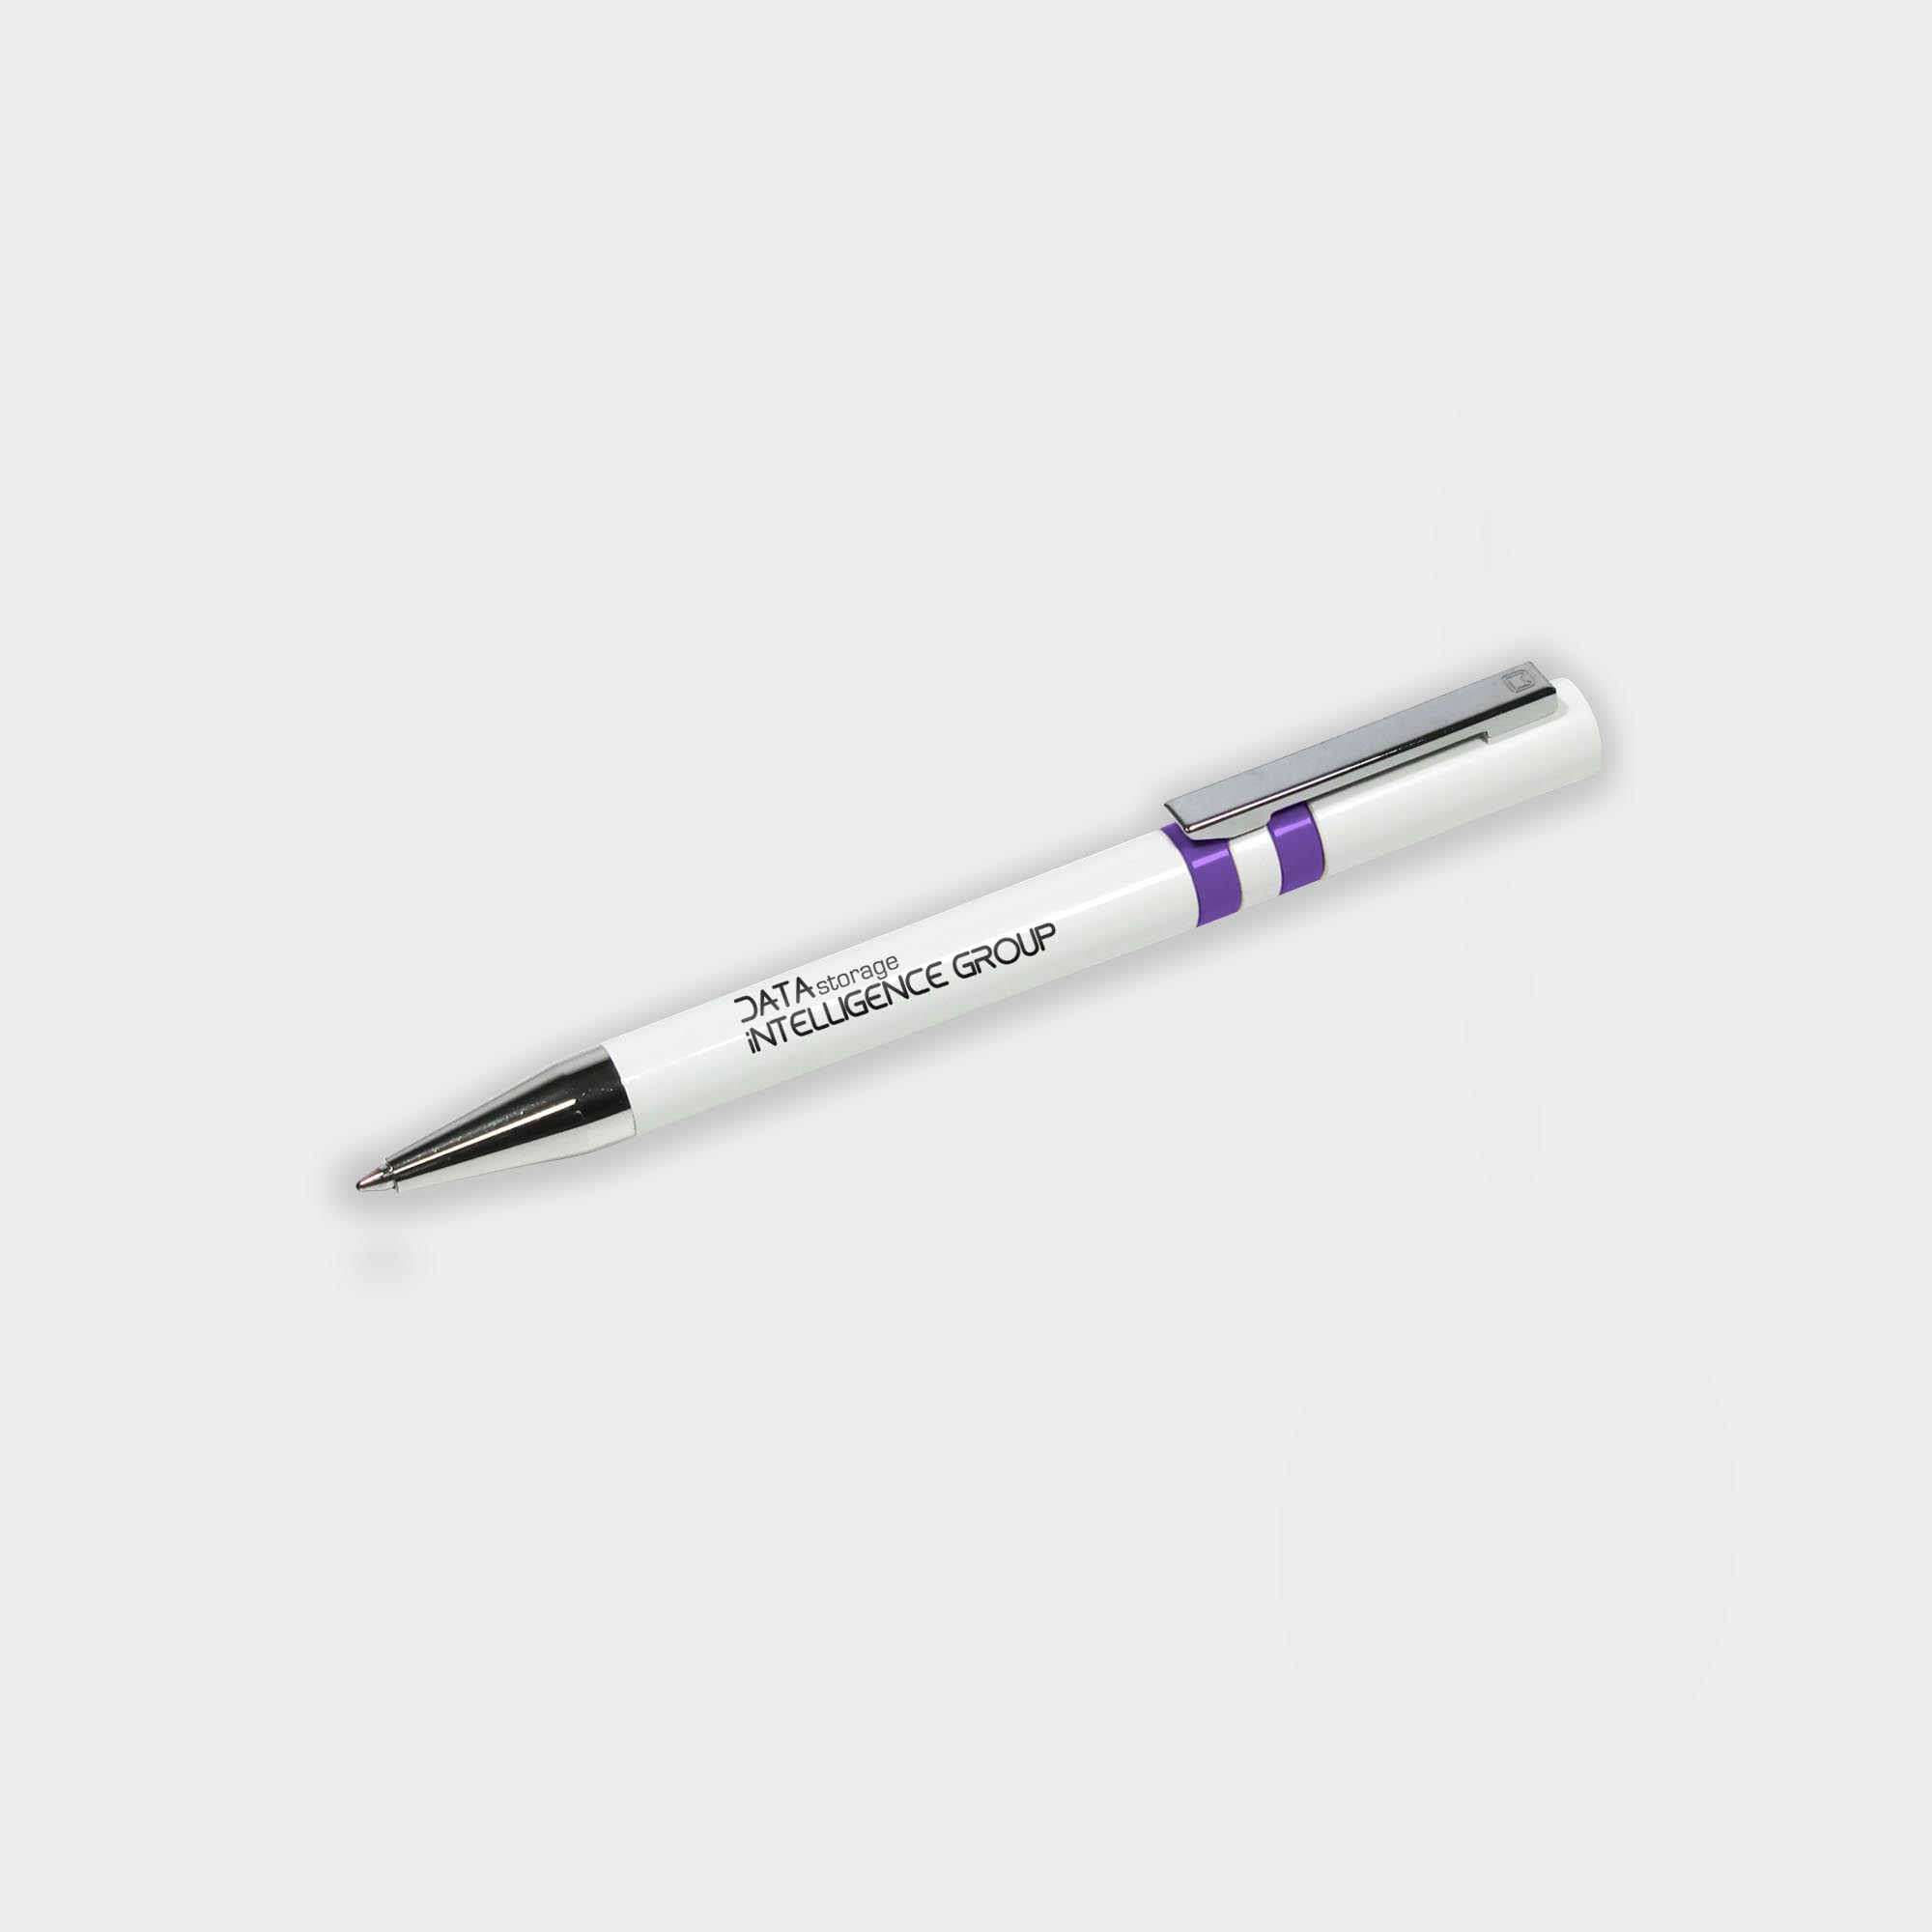 Printed Ethic Recycled Executive Pen